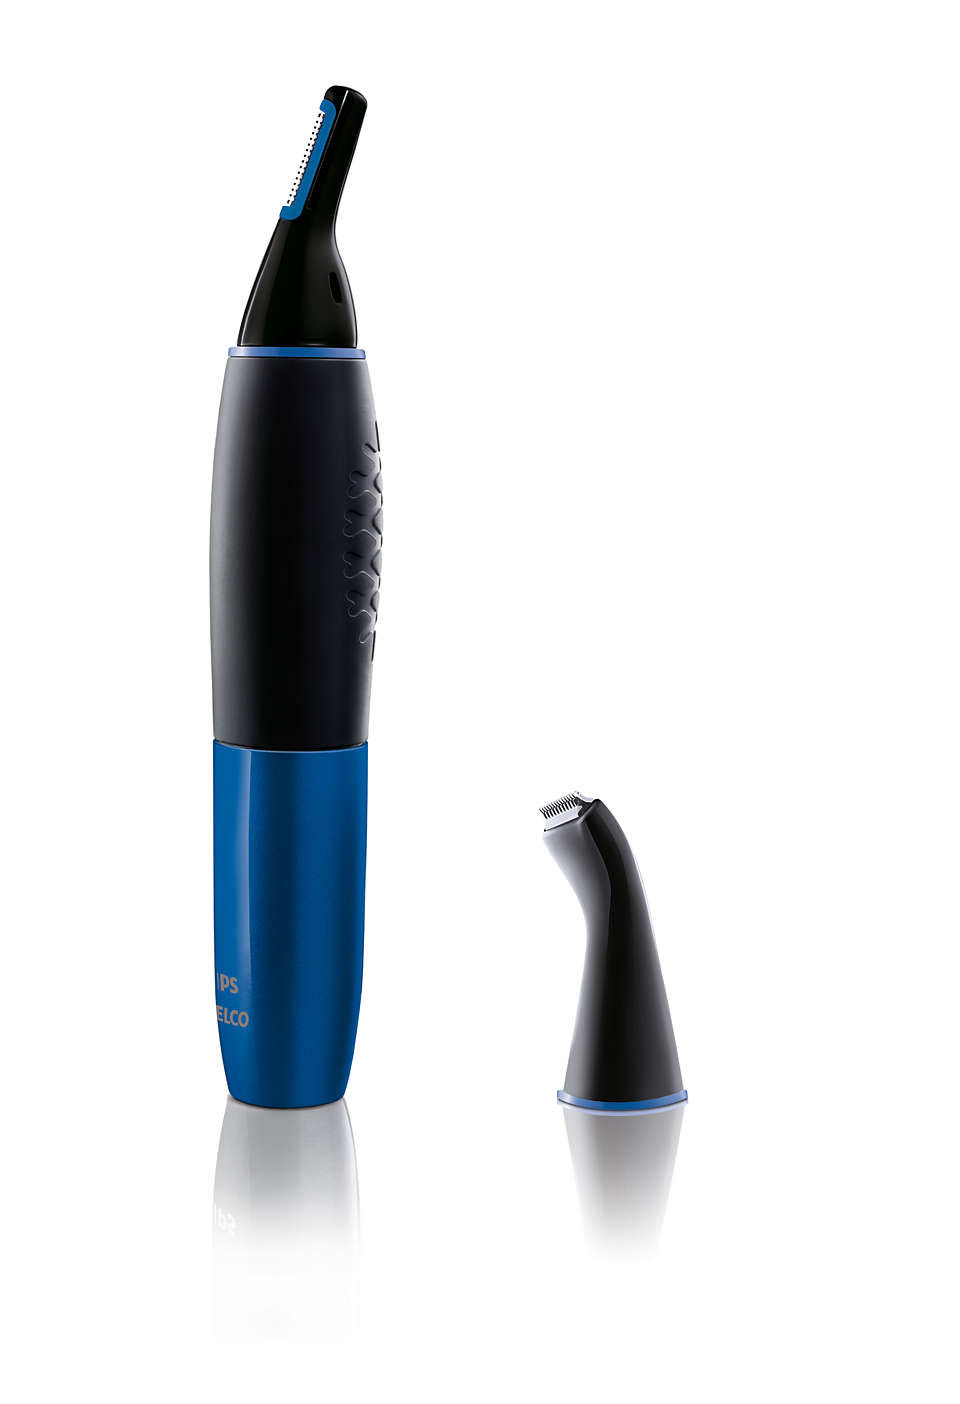 3-in-1 nose, ear and eyebrow trimmer